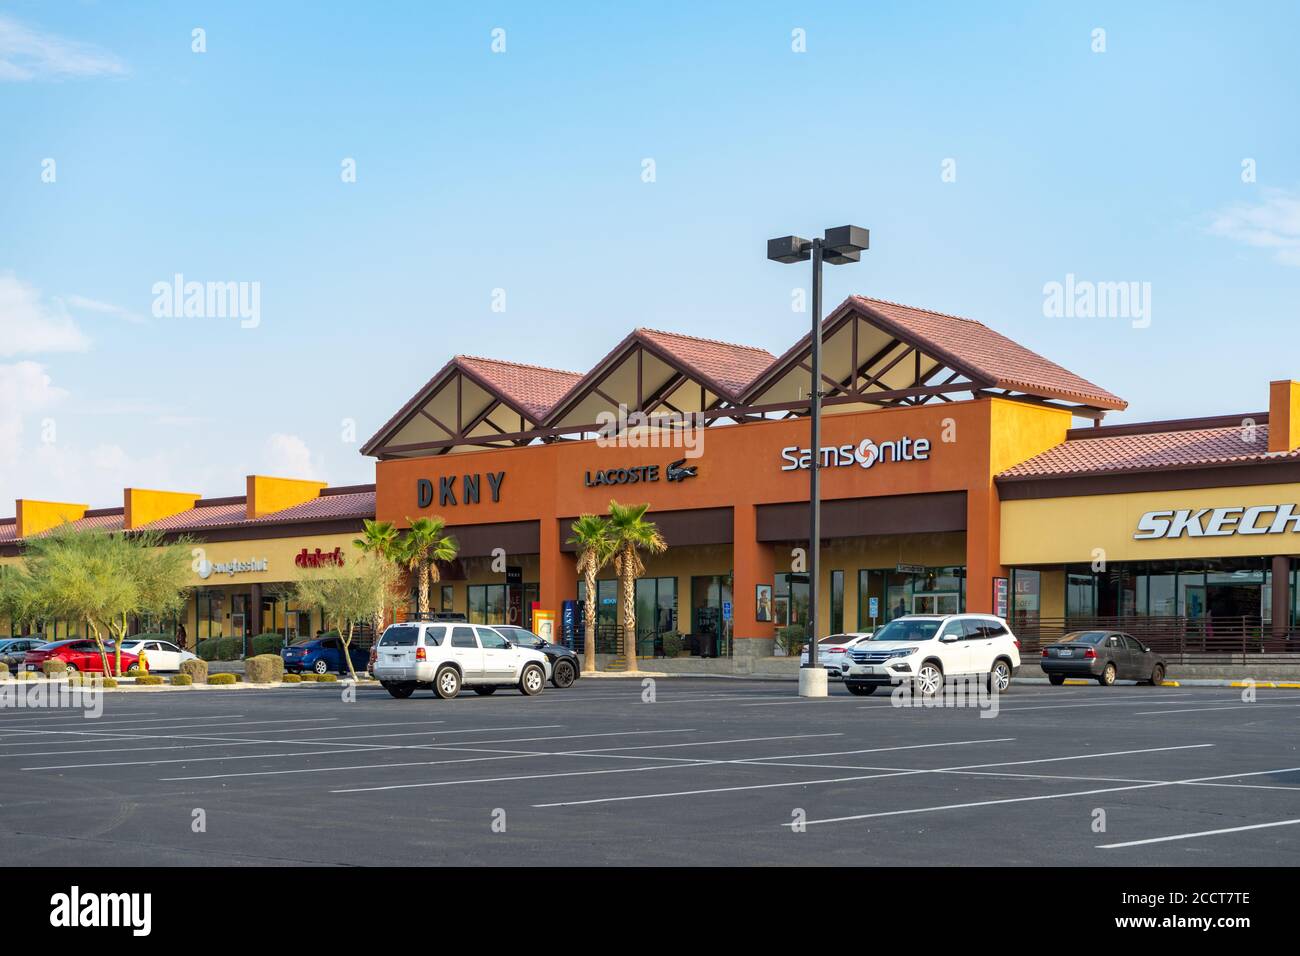 Barstow, CA / USA – August 22, 2020: Retail stores at The Outlets at Barstow located adjacent to Interstate 15 in Barstow, California. Stock Photo